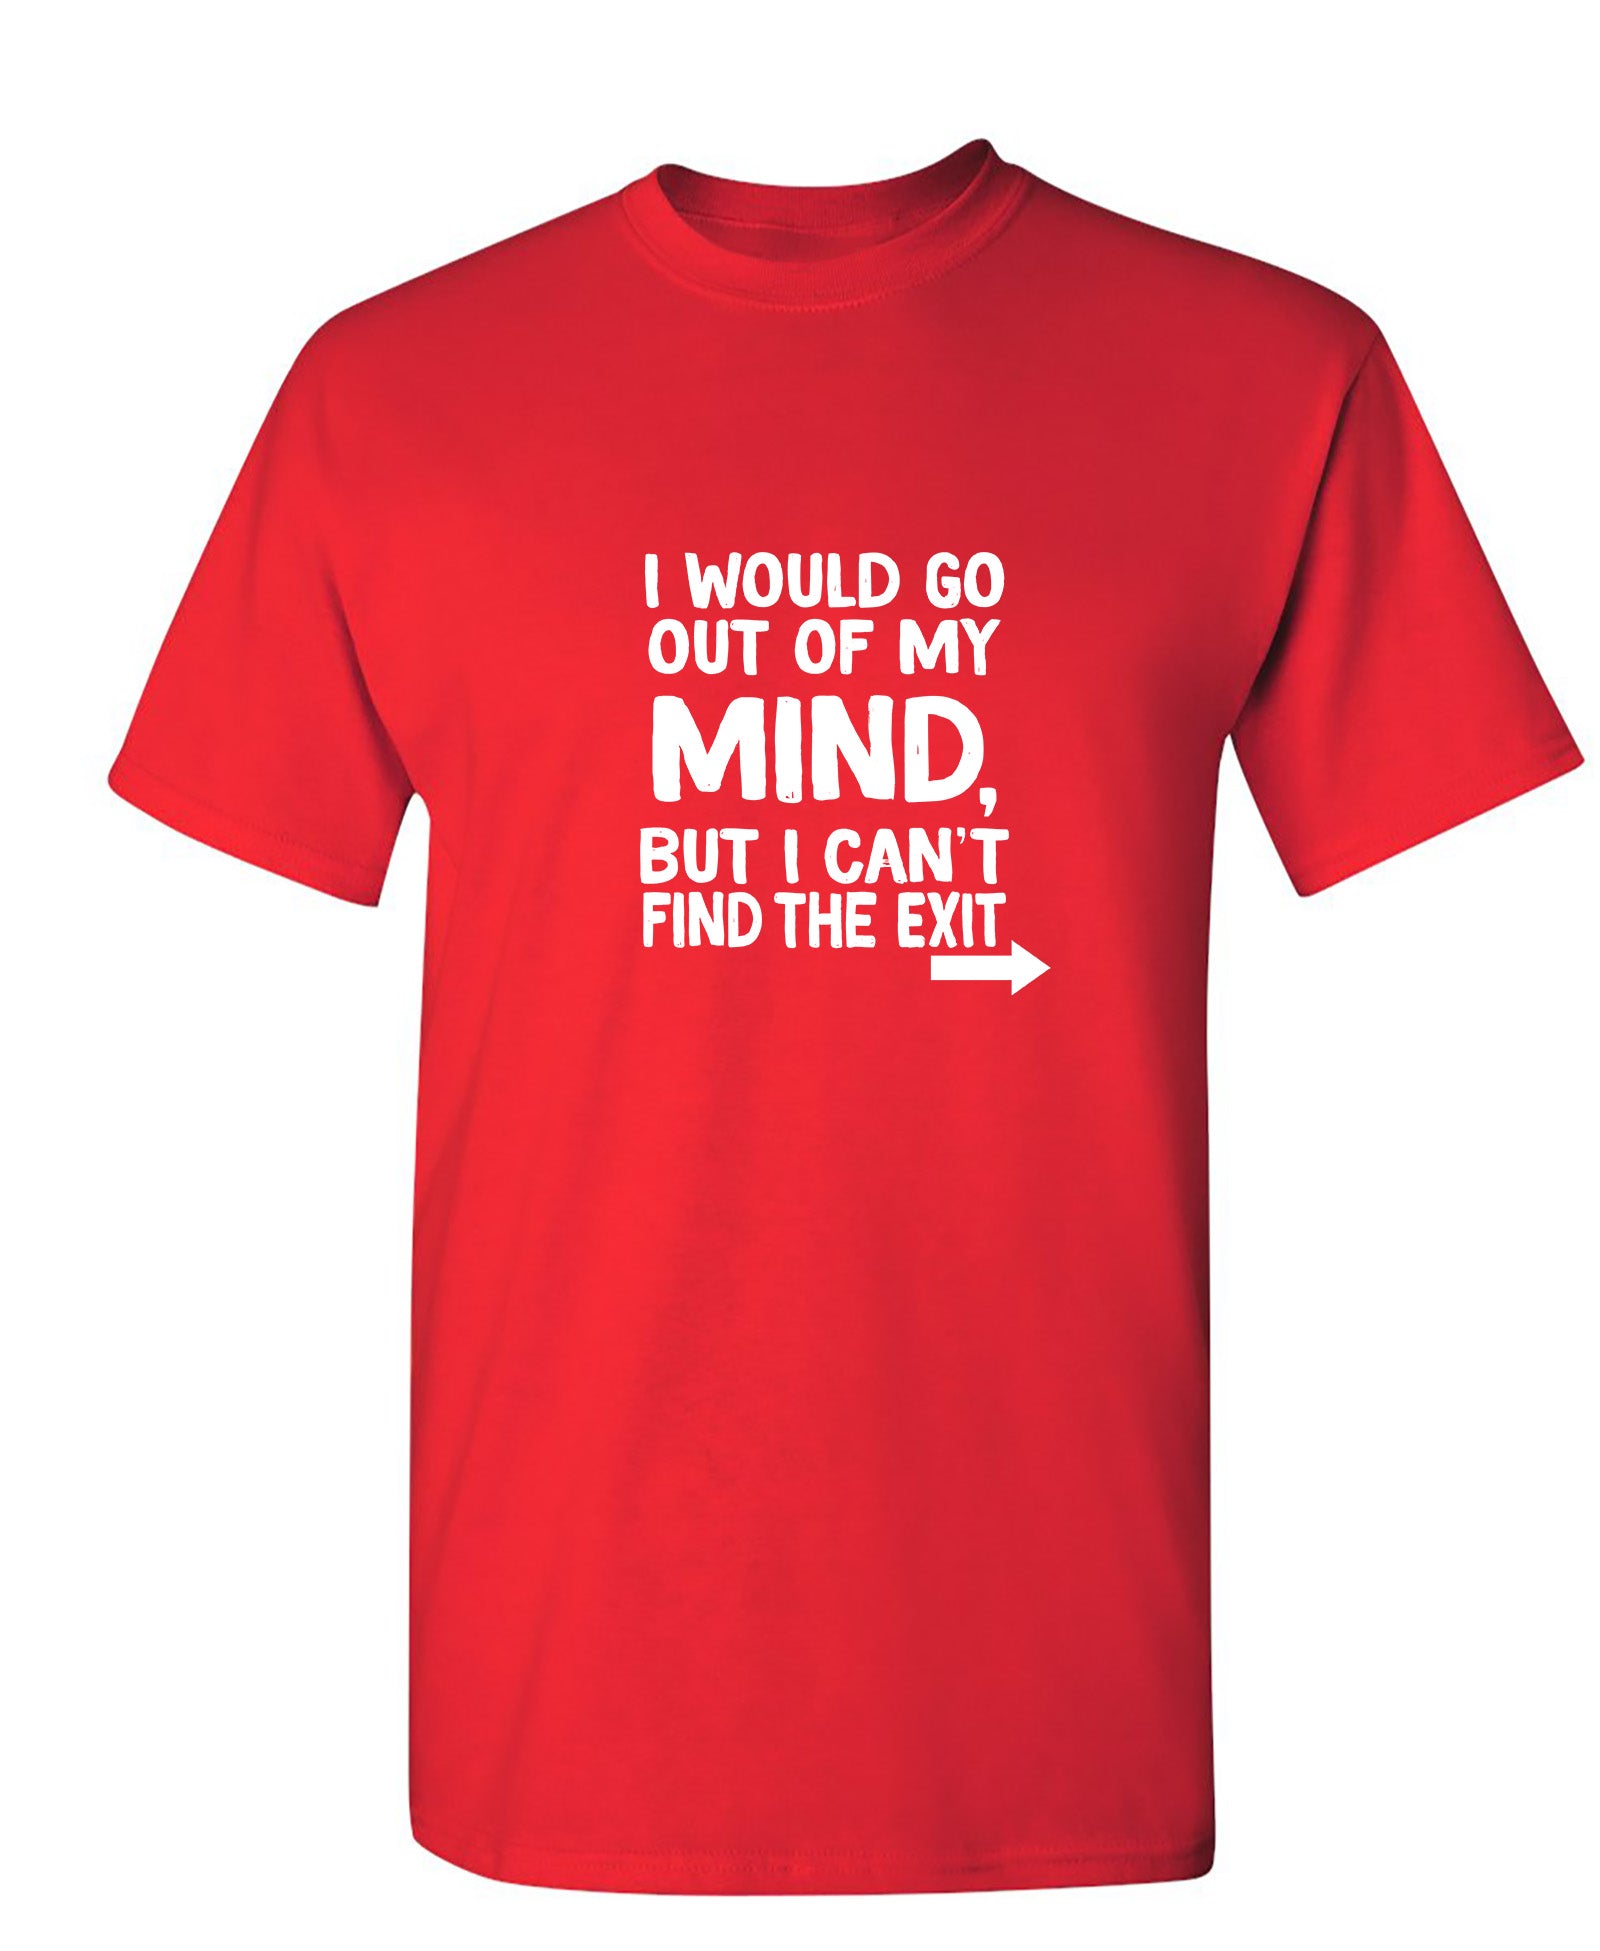 I would go out of my mind but I can't find the exit - Funny T Shirts & Graphic Tees